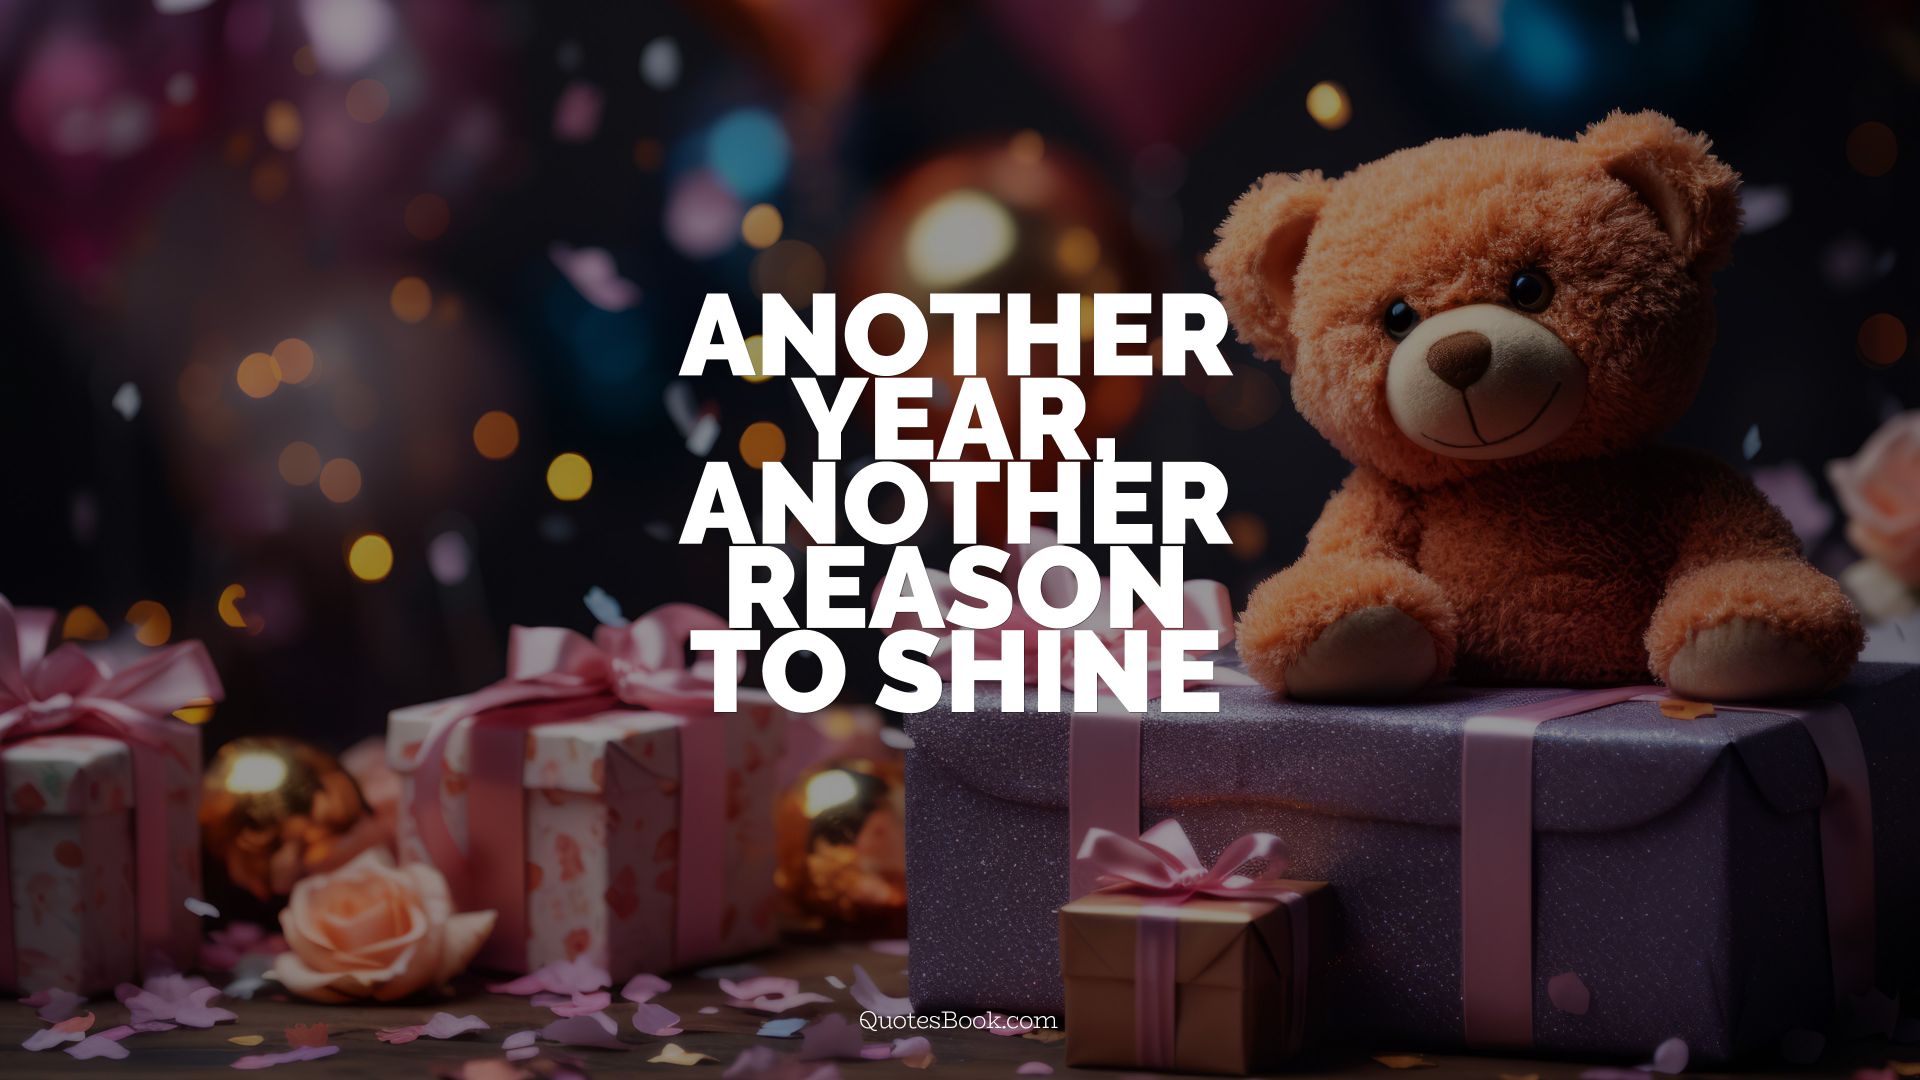 Another year, another reason to shine. - Quote by QuotesBook